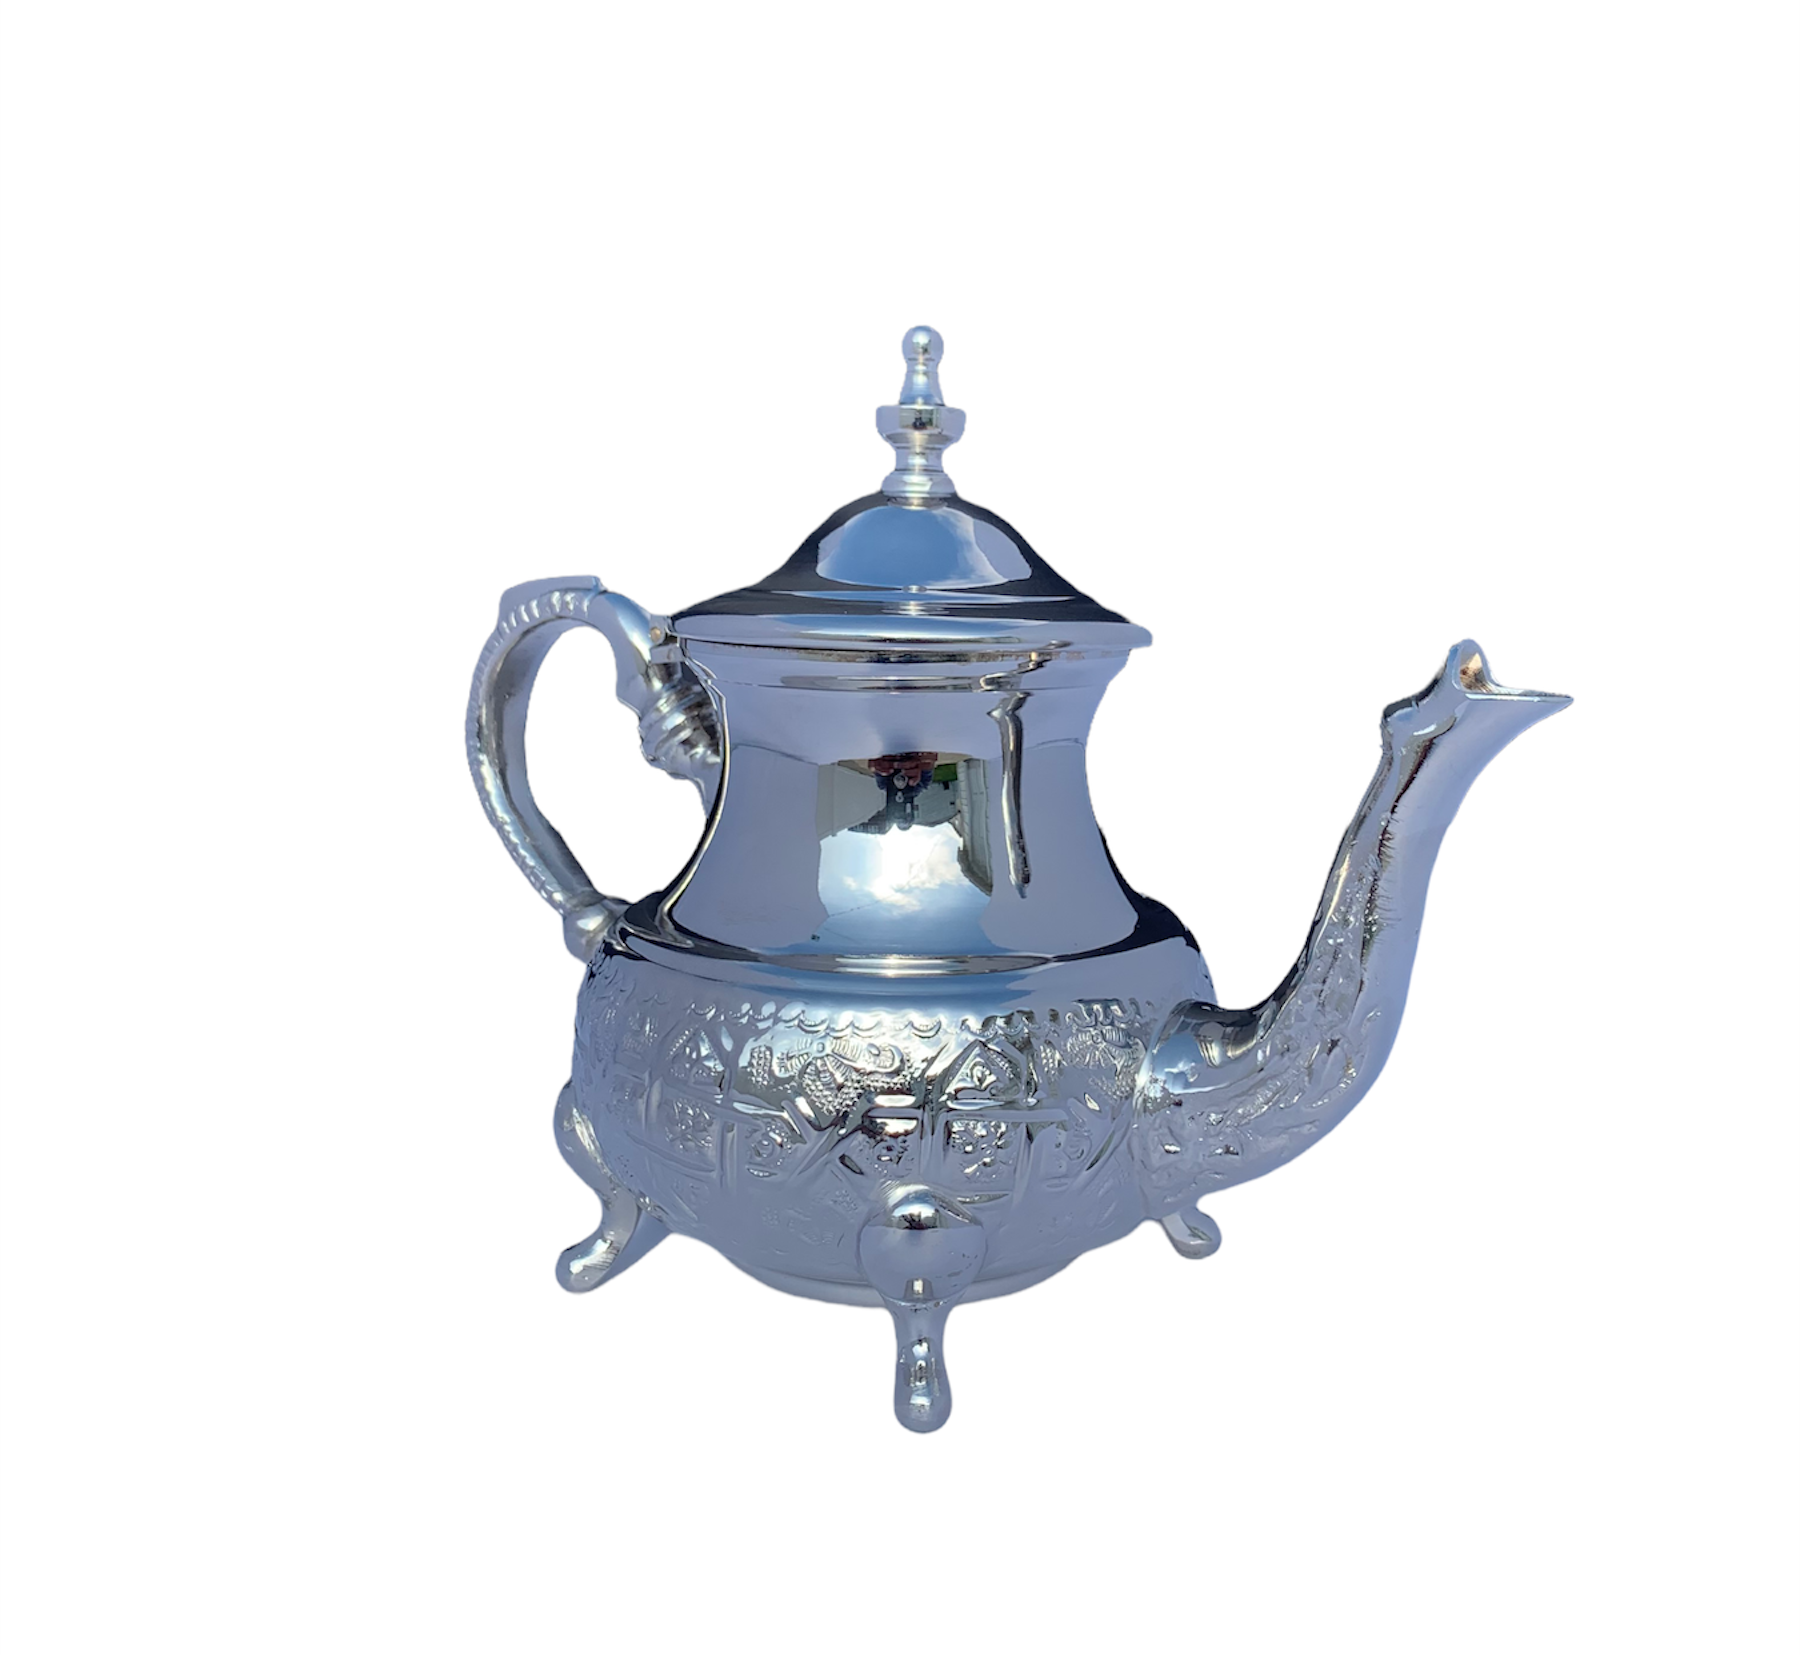 Imported Handmade Moroccan Teapot with Built In Tea Infuser Filter, Bring Home a Beautifully Functional Near East Tradition, 16 OZ. - Marrakesh Gardens